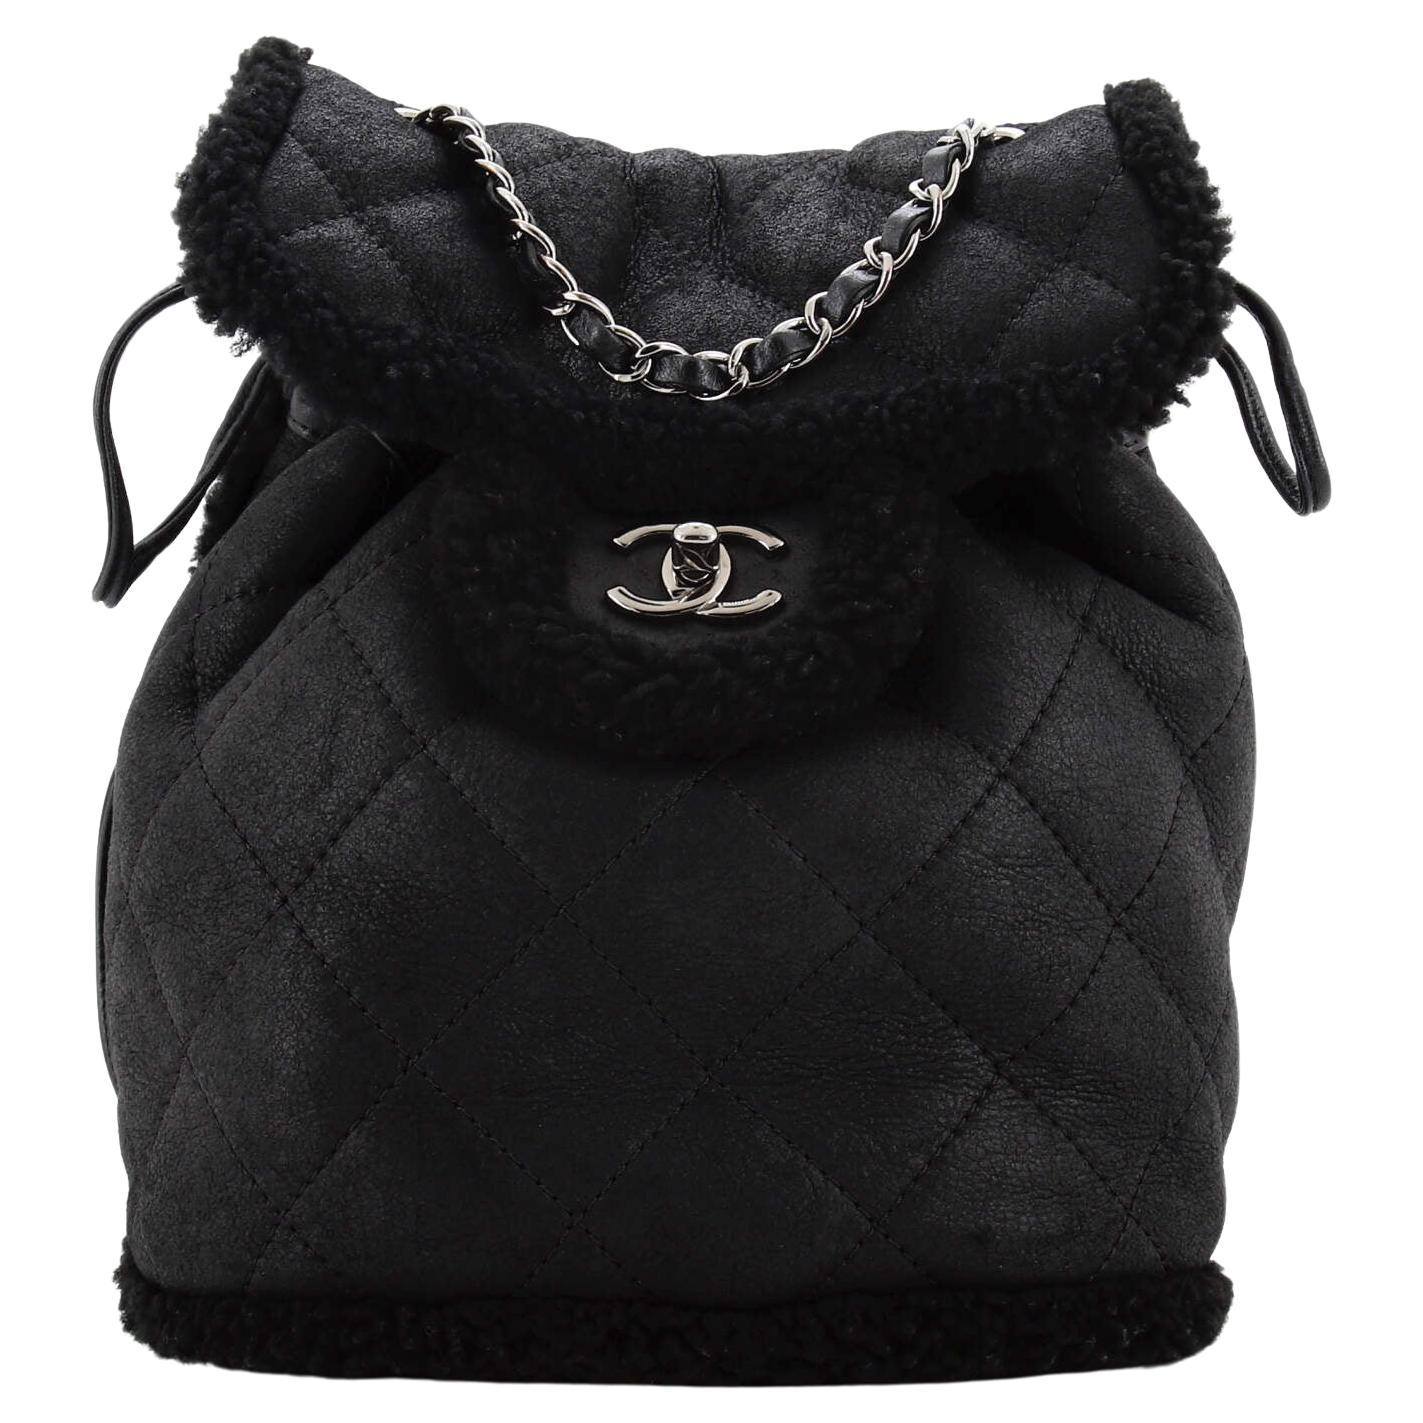 Chanel Coco Neige - 8 For Sale on 1stDibs  chanel coco neige jacket, chanel  neige, chanel coco neige backpack